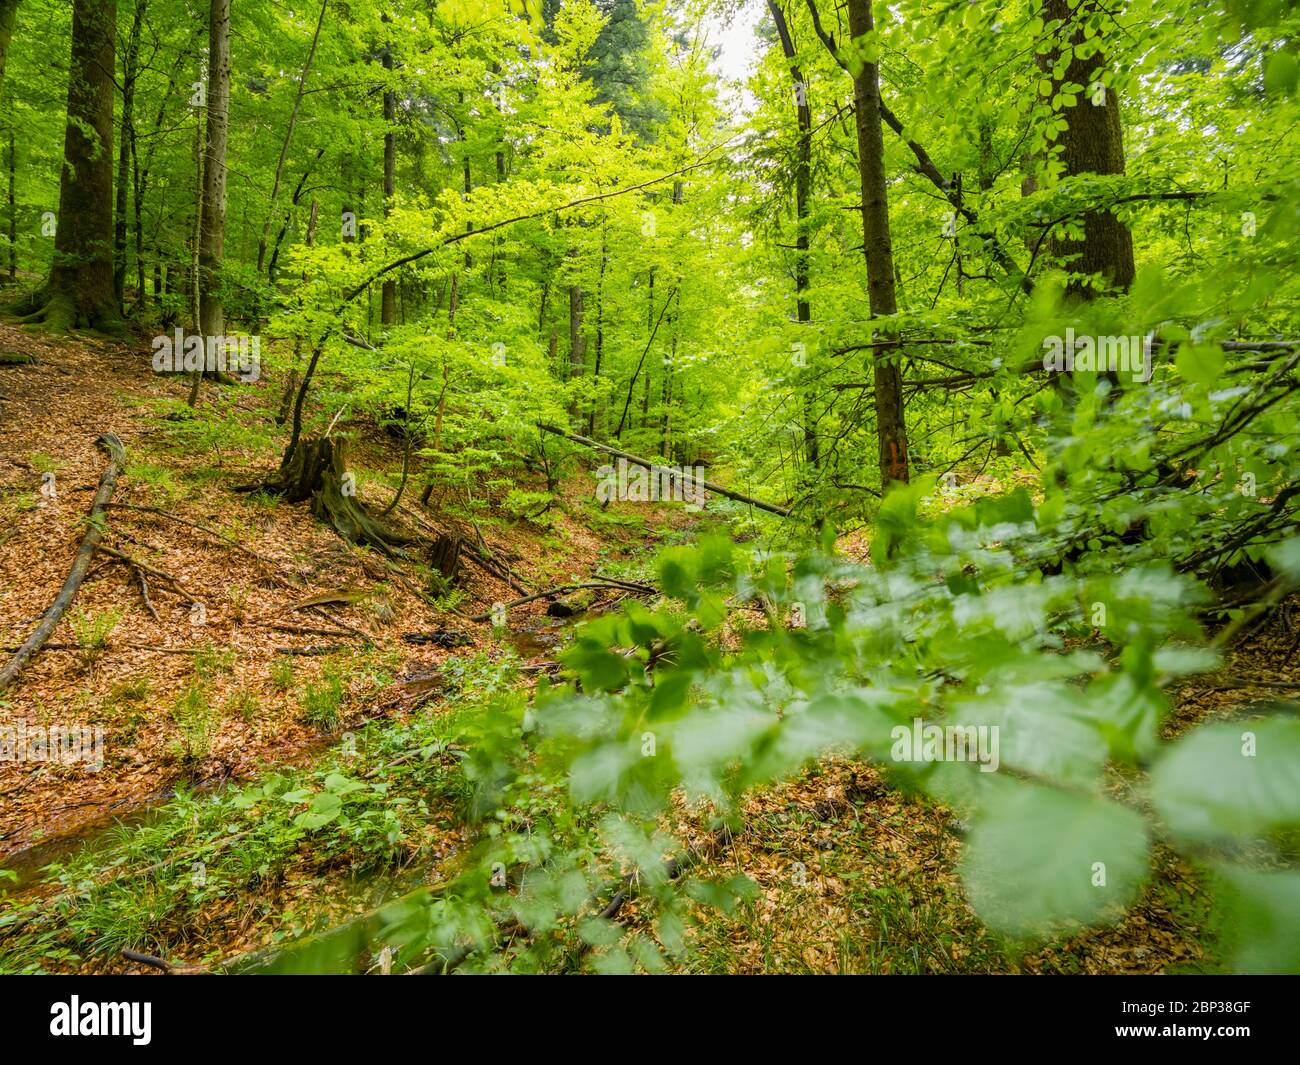 Stunning Spring Green nature color in forest windy movements movement moving leaves tree branches view through leaves Stock Photo